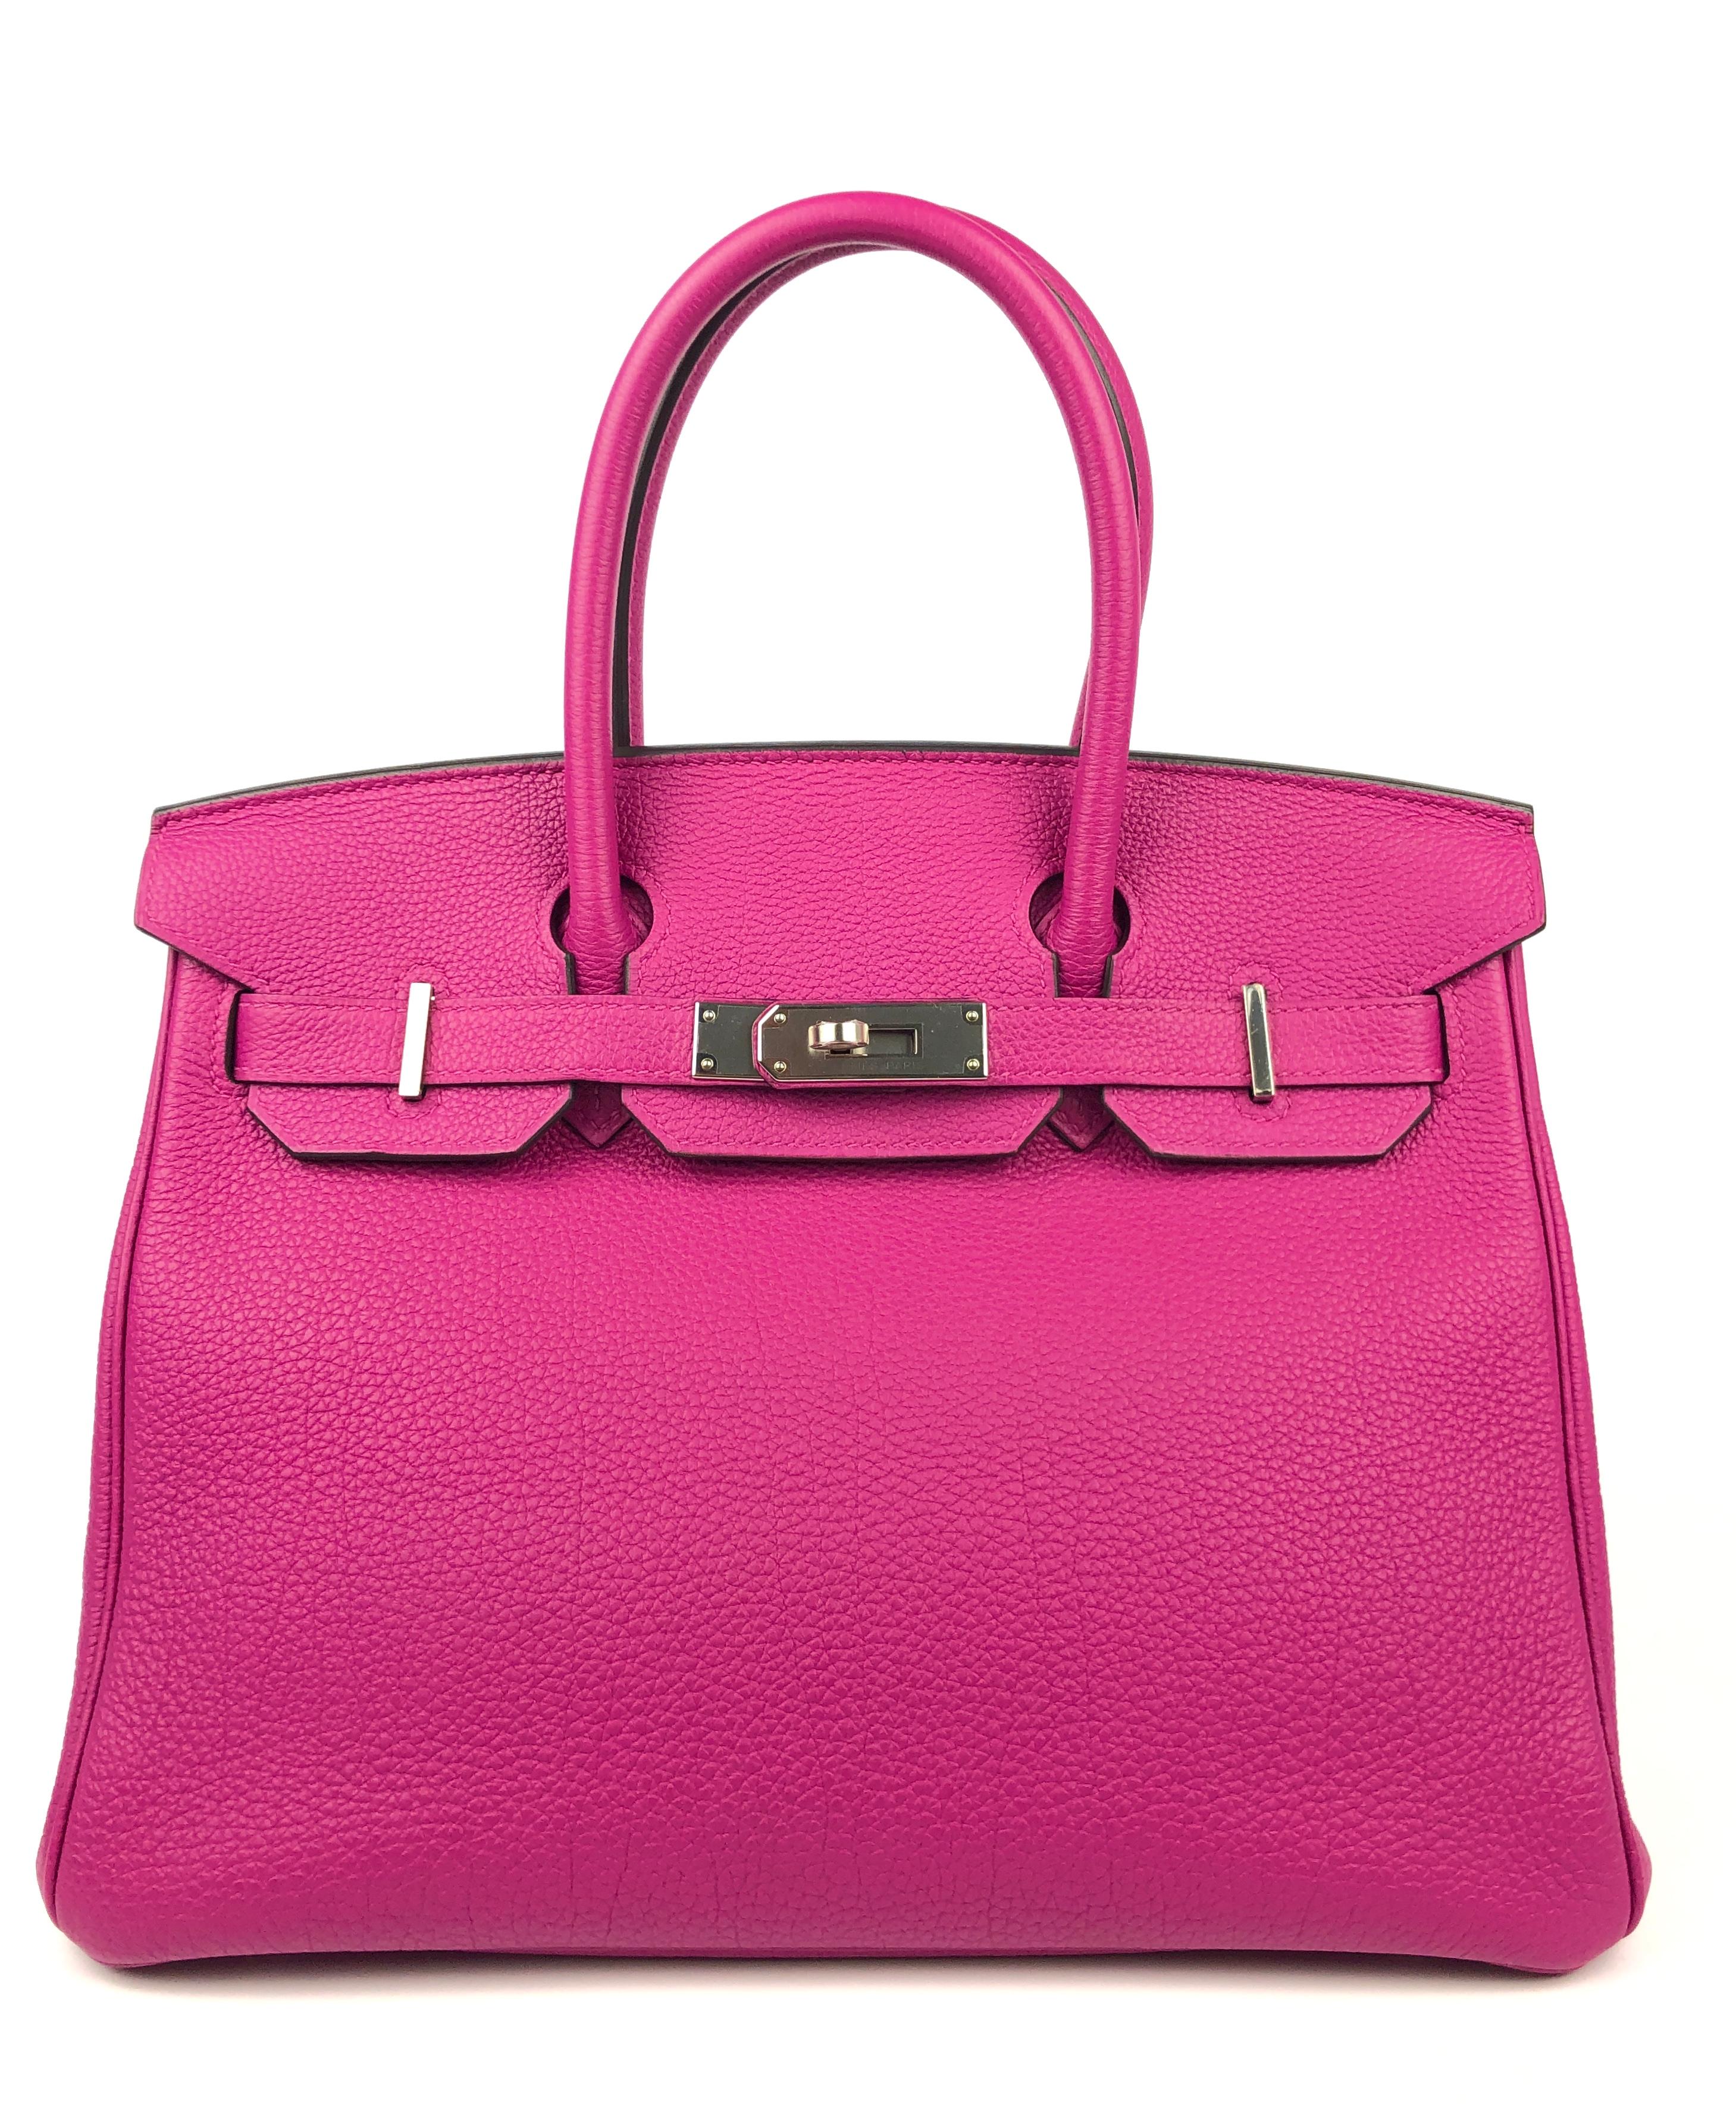 RARE Stunning Hermes Birkin 30 Rose Pourpre Pink Purple Palladium Hardware. Pristine Condition Like New with Plastic on All Hardware.

Shop with Confidence from Lux Addicts. Authenticity Guaranteed!